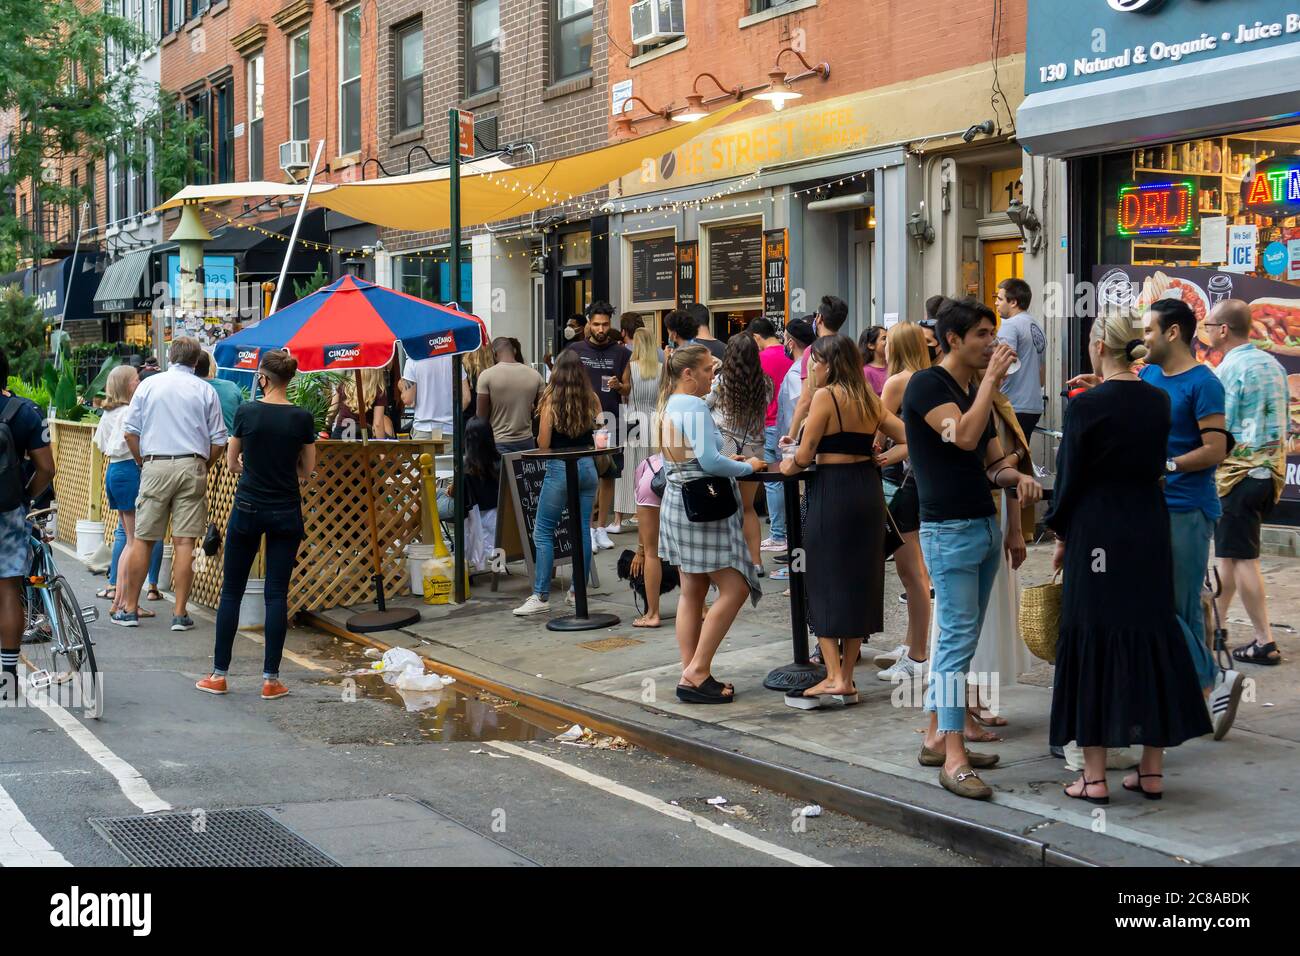 Crowds of people congregate outside of Bathtub Gin in the Chelsea neighborhood of New York as the bar celebrates its 9th anniversary with a party on Thursday, July 16, 2020. NYS Gov. Andrew Cuomo will announce plans for the city to enter Phase 4 of its reopening but no additional indoor activities will be permitted, partially citing issues with bars and restaurants non-compliance. (© Richard B. Levine) Stock Photo